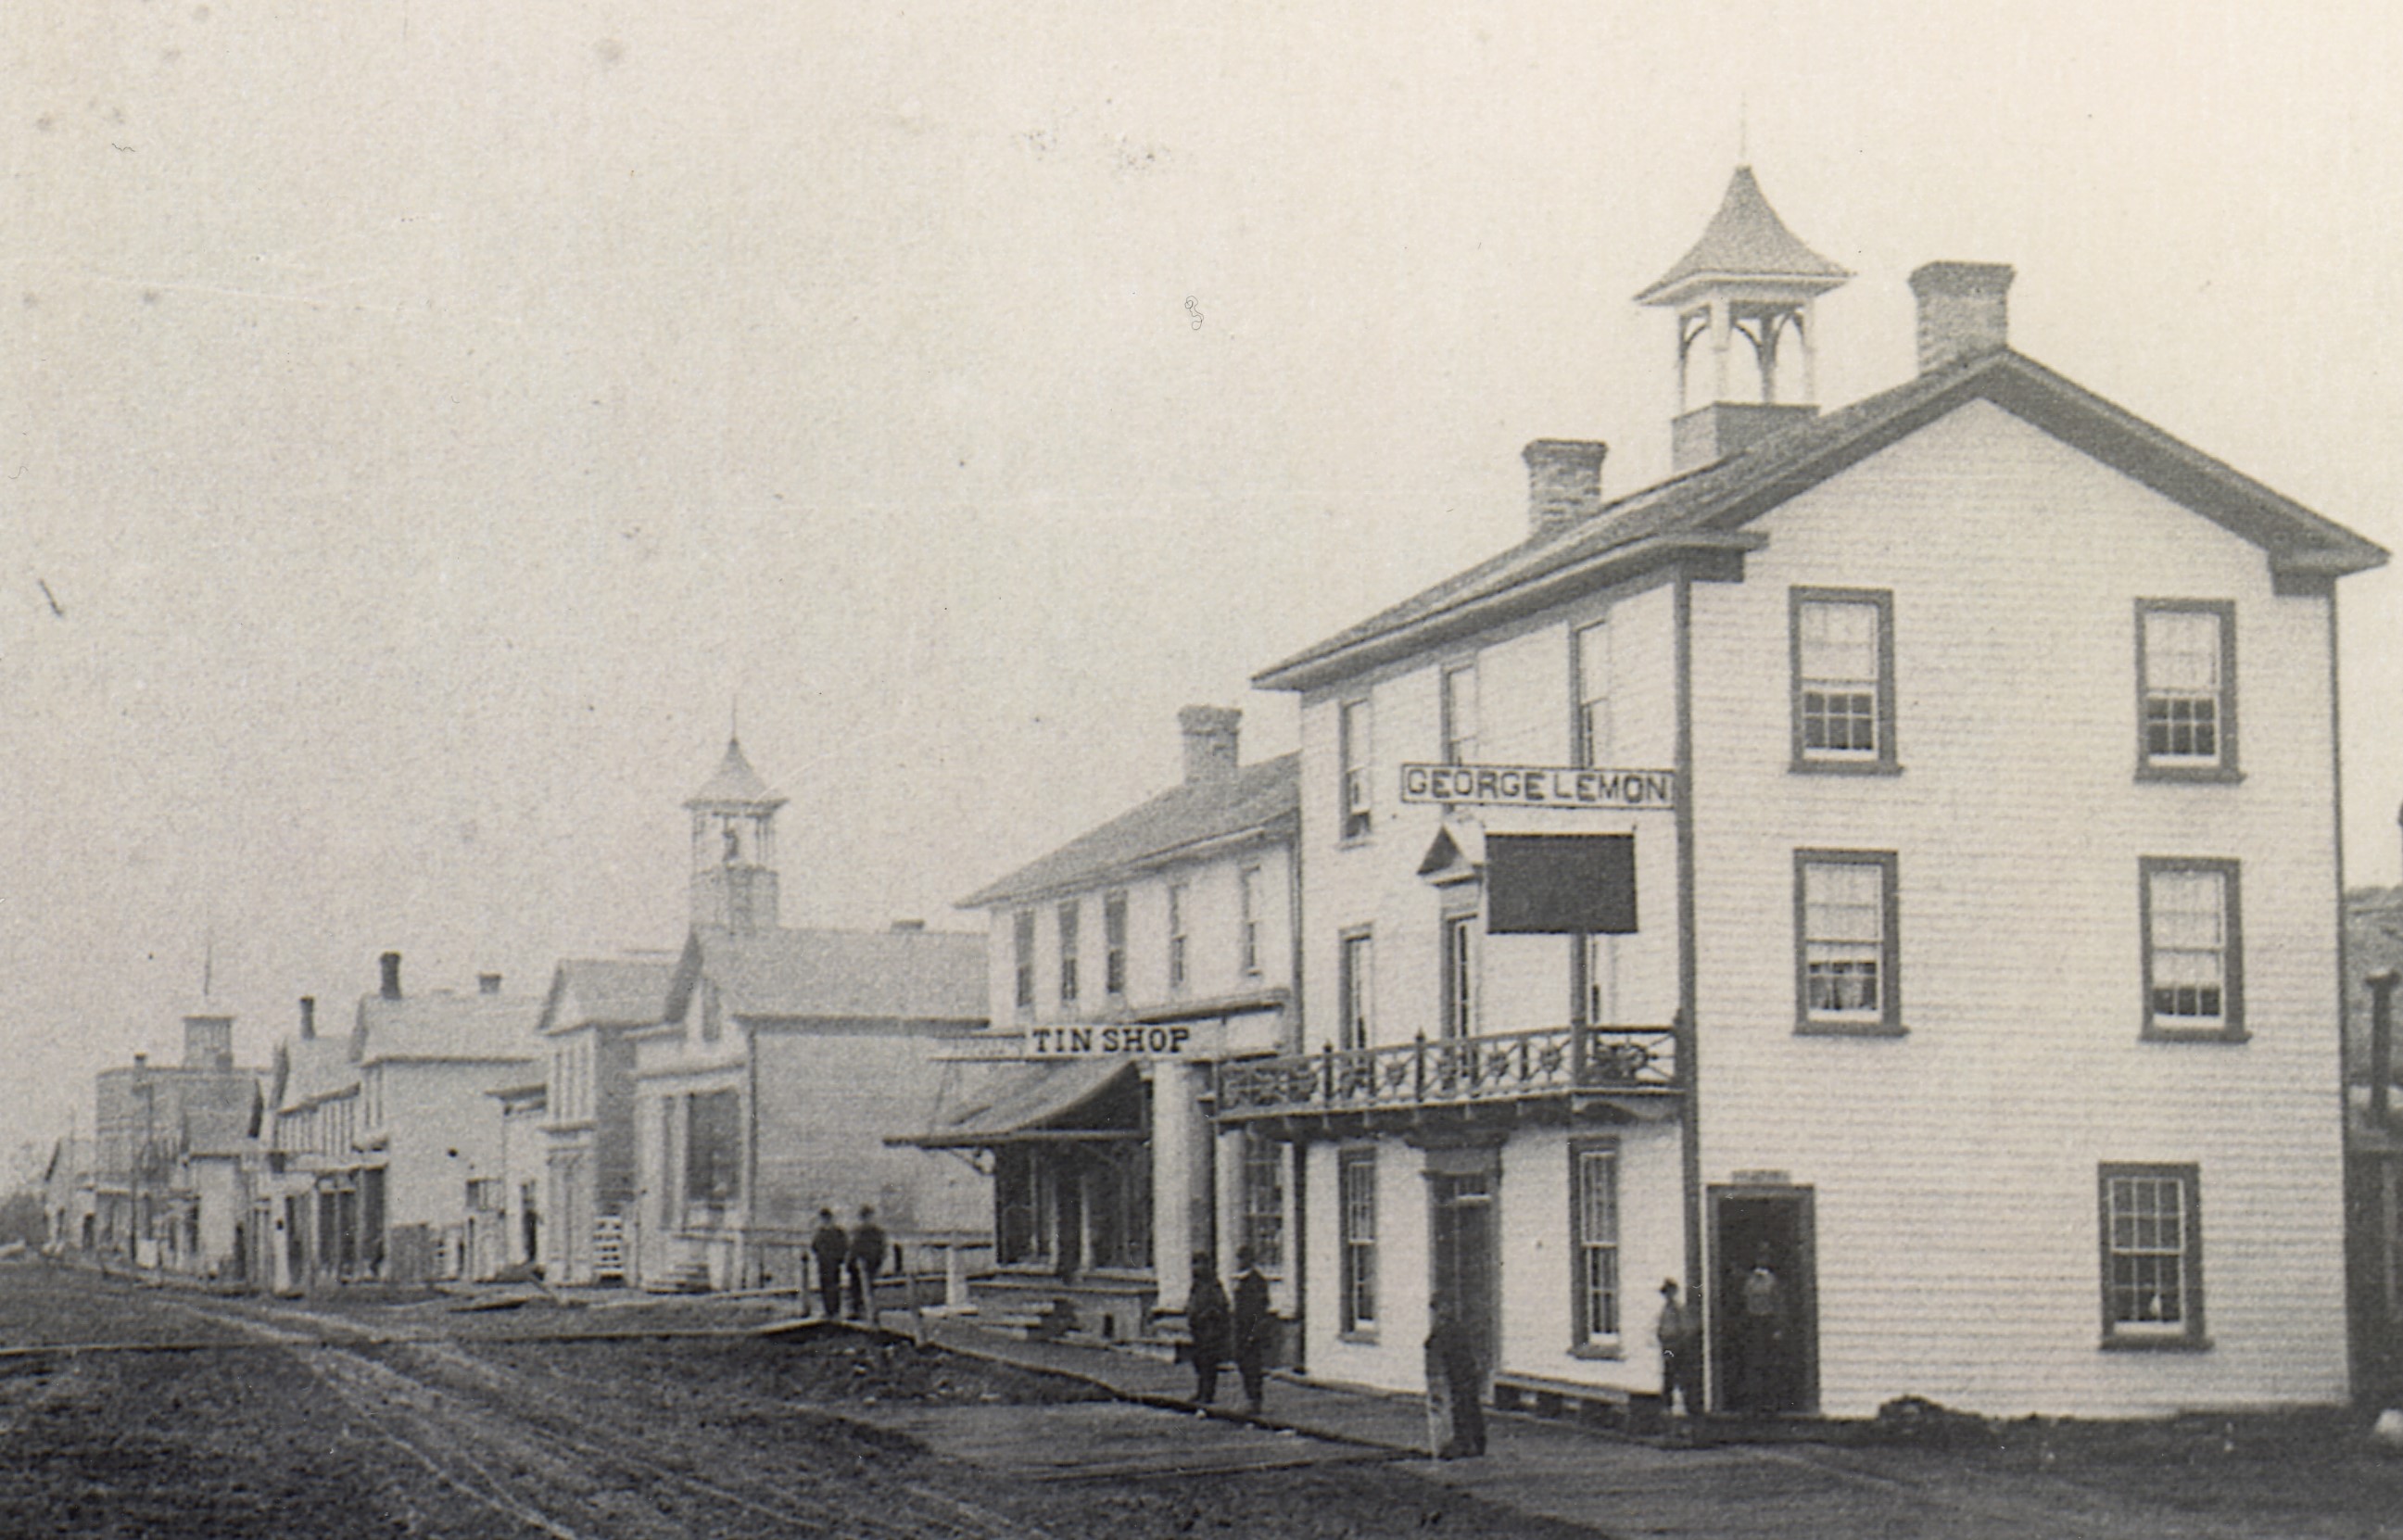 A black and white image that captures Yonge Street in the 1870s. 